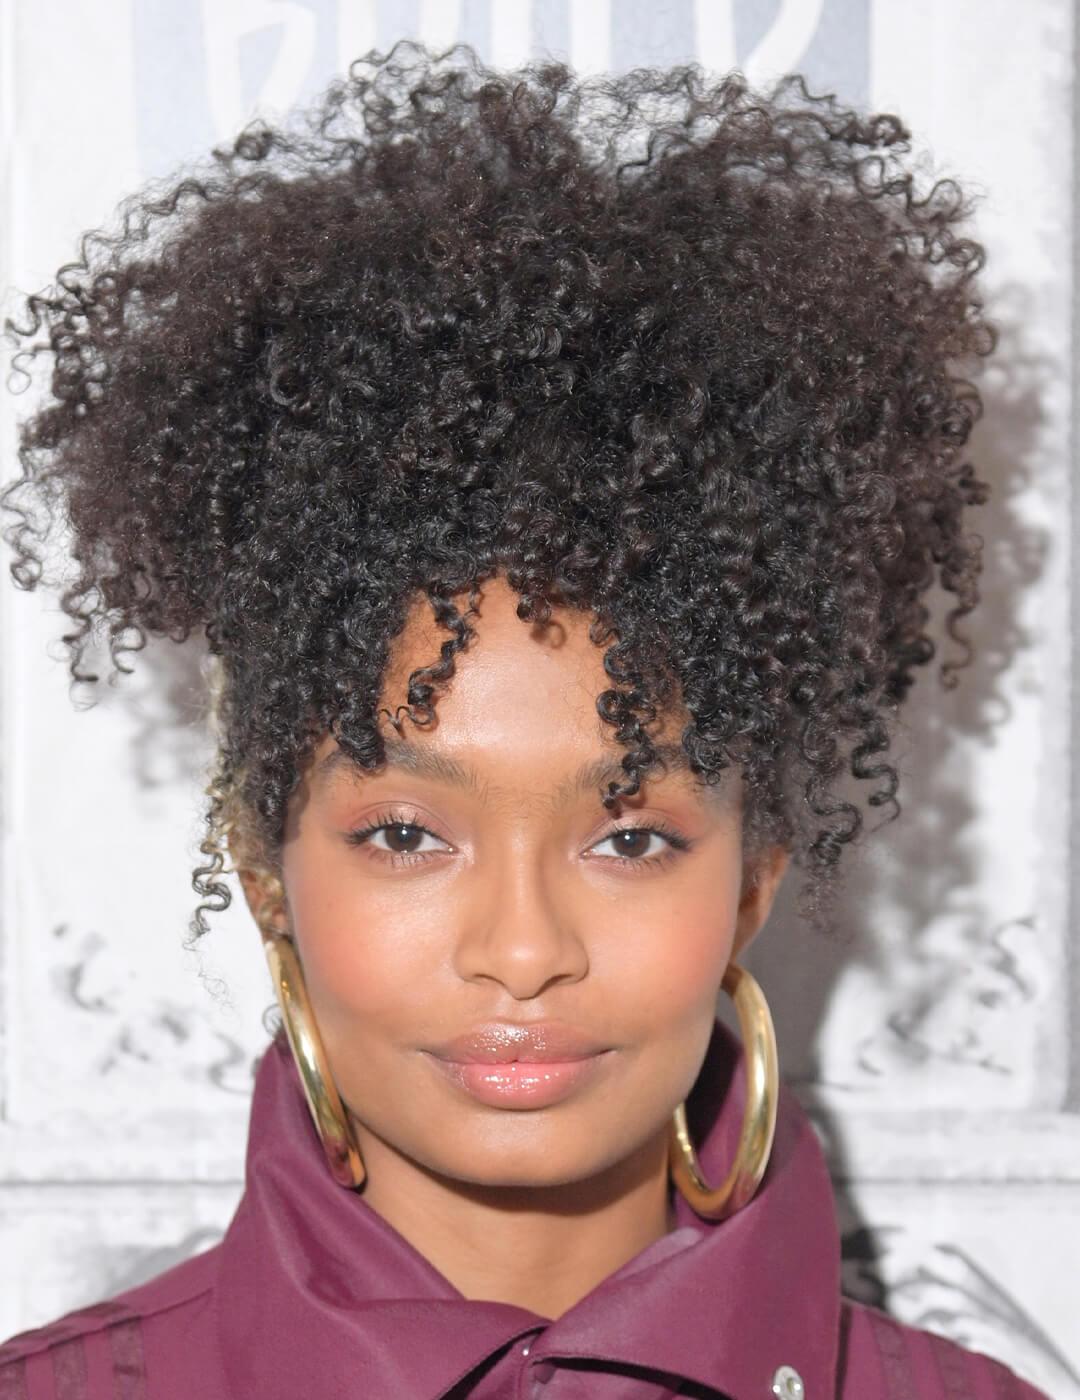 Close-up image of Yara Shahidi rocking a muted magenta coat, bold hoop earrings, and curly updo hairstyle